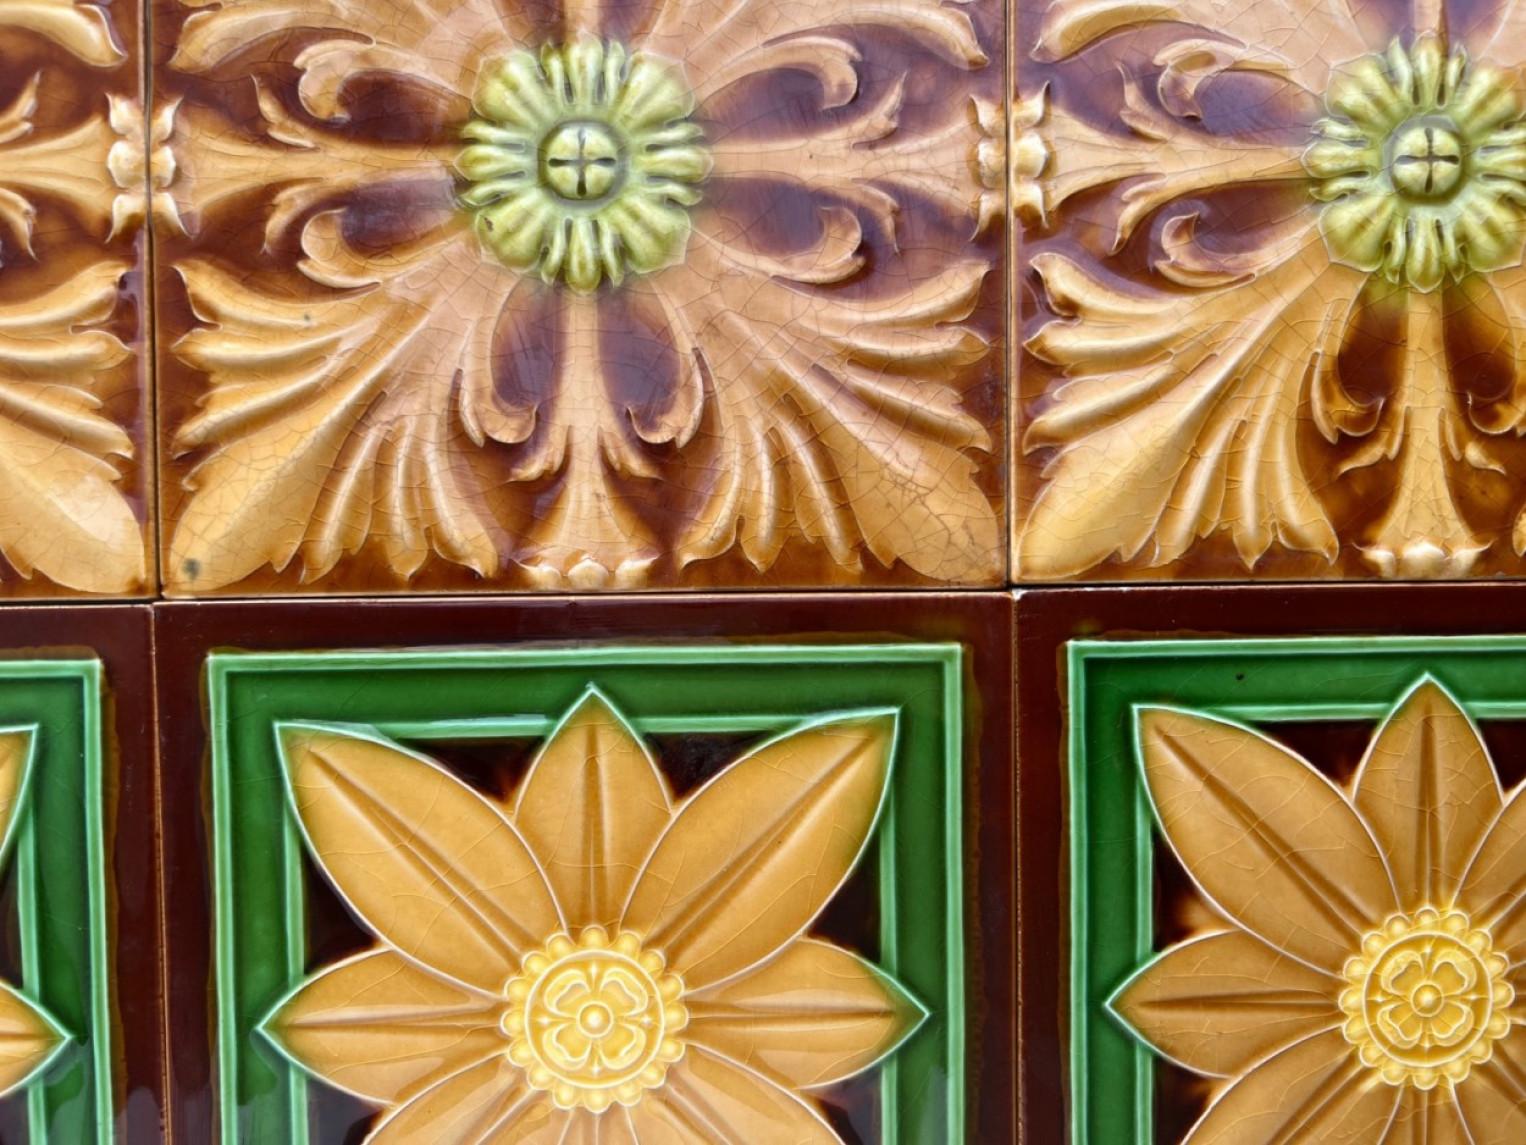 Early 20th Century Mixed Relief Art Deco Tiles by Gilliot Hemiksem, circa 1920 For Sale